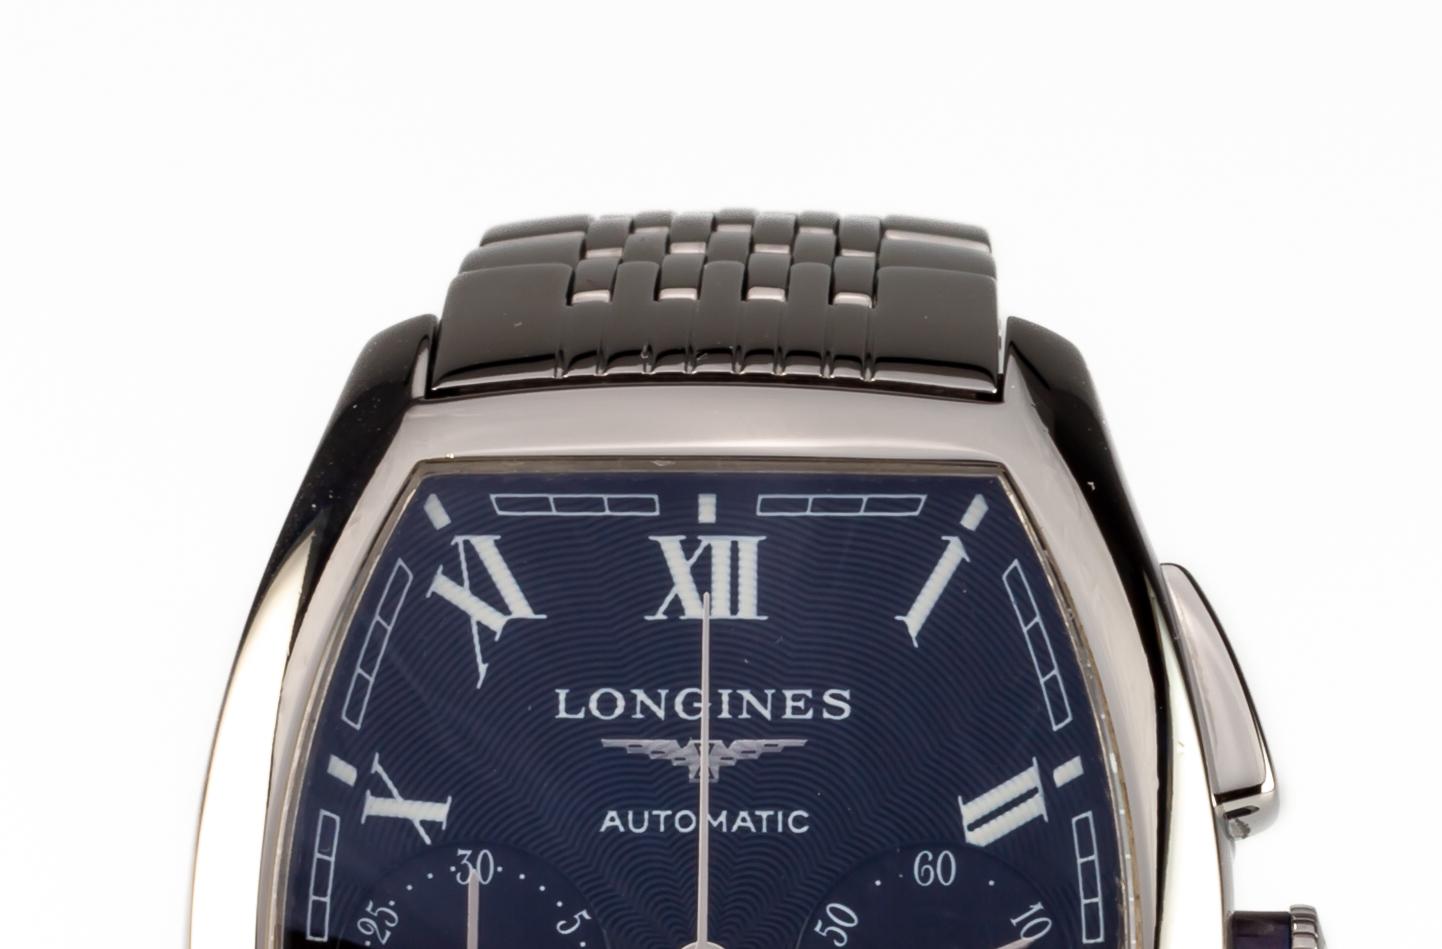 Longines Evidenza Men's Automatic Chronograph Watch w/ Box and Papers L2.643.4

Model: Evidenza
Model #L2.643.4
Serial #31331369

Stainless Steel Tonneau Shaped Case
34 mm Wide (36 mm w/ Crown)
39 mm Long
Lug-to-Lug Distance = 42 mm
Lug-to-Lug Width